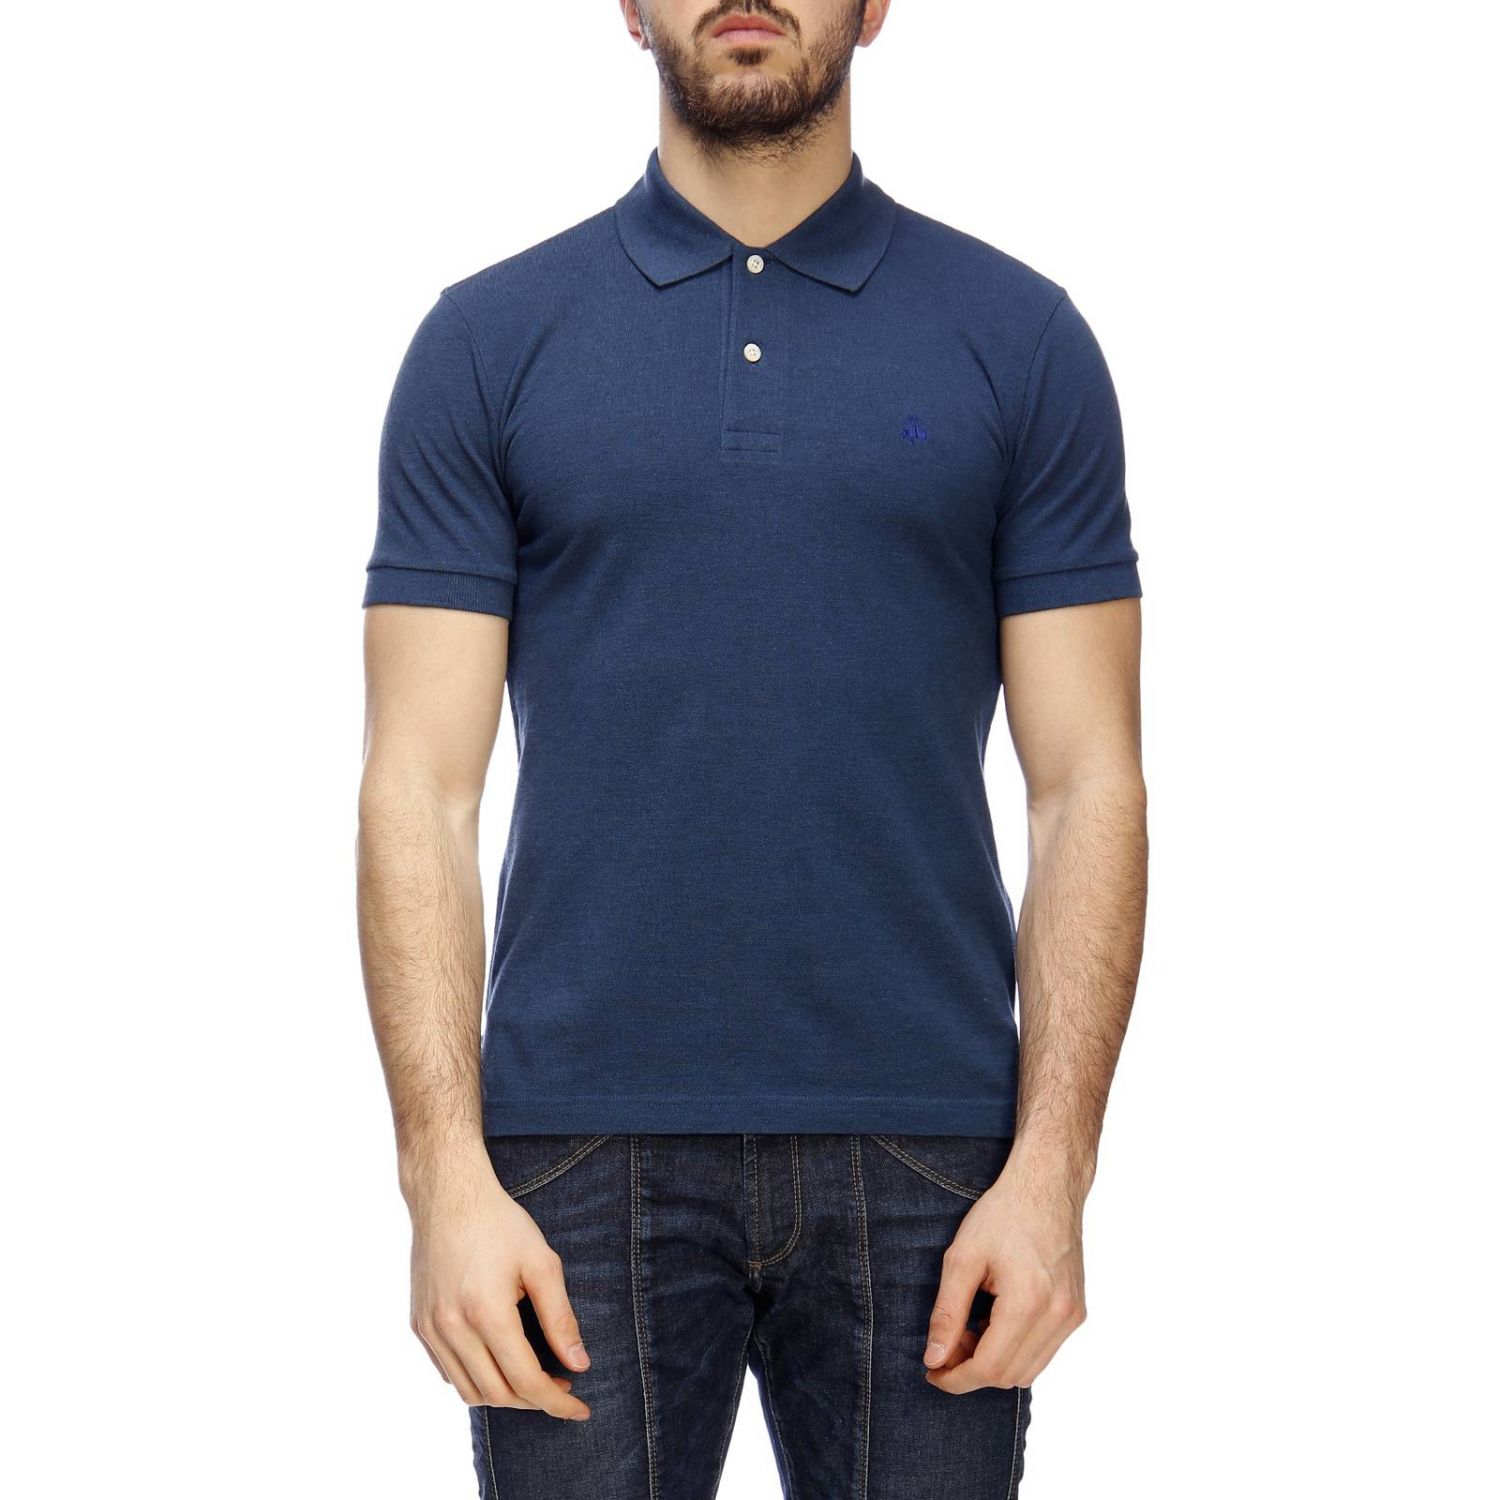 Brooks Brothers Outlet: t-shirt for man - Avion | Brooks Brothers t ...